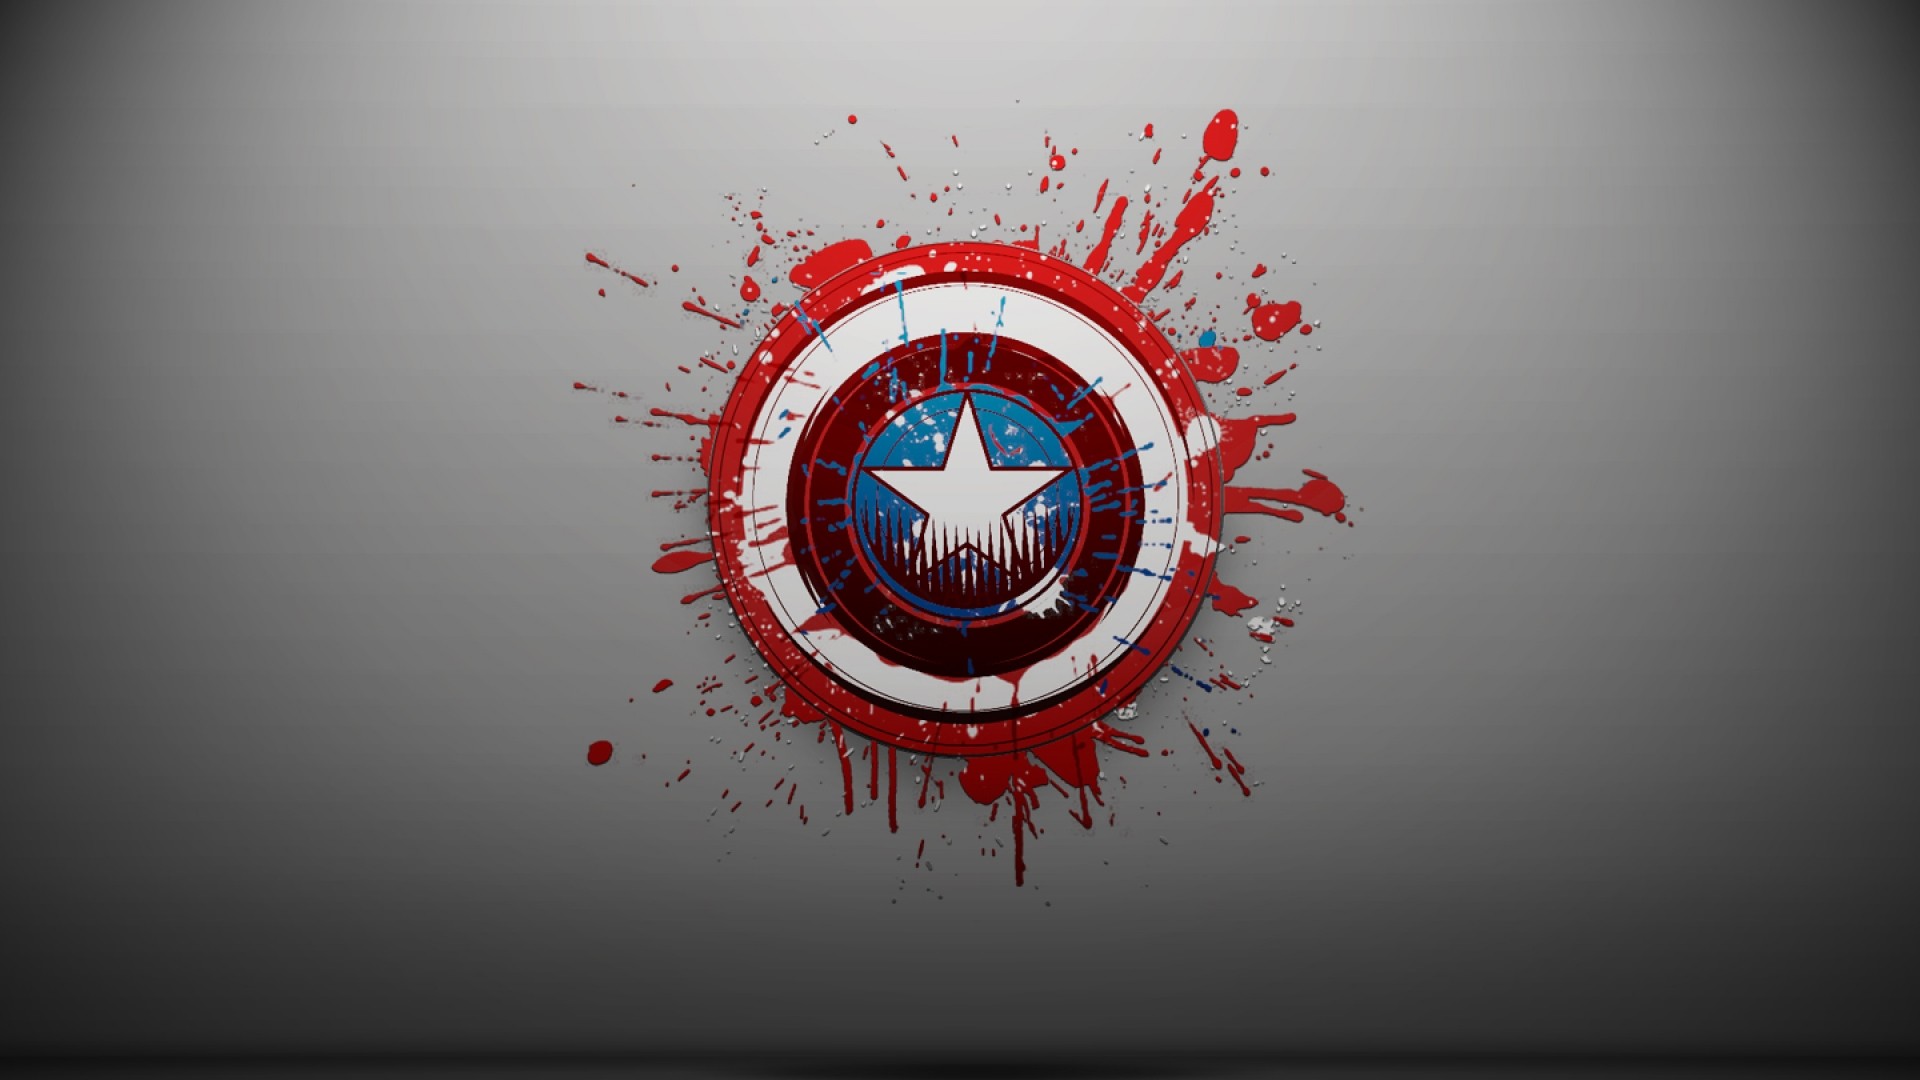 Awesome Captain America Wallpaper